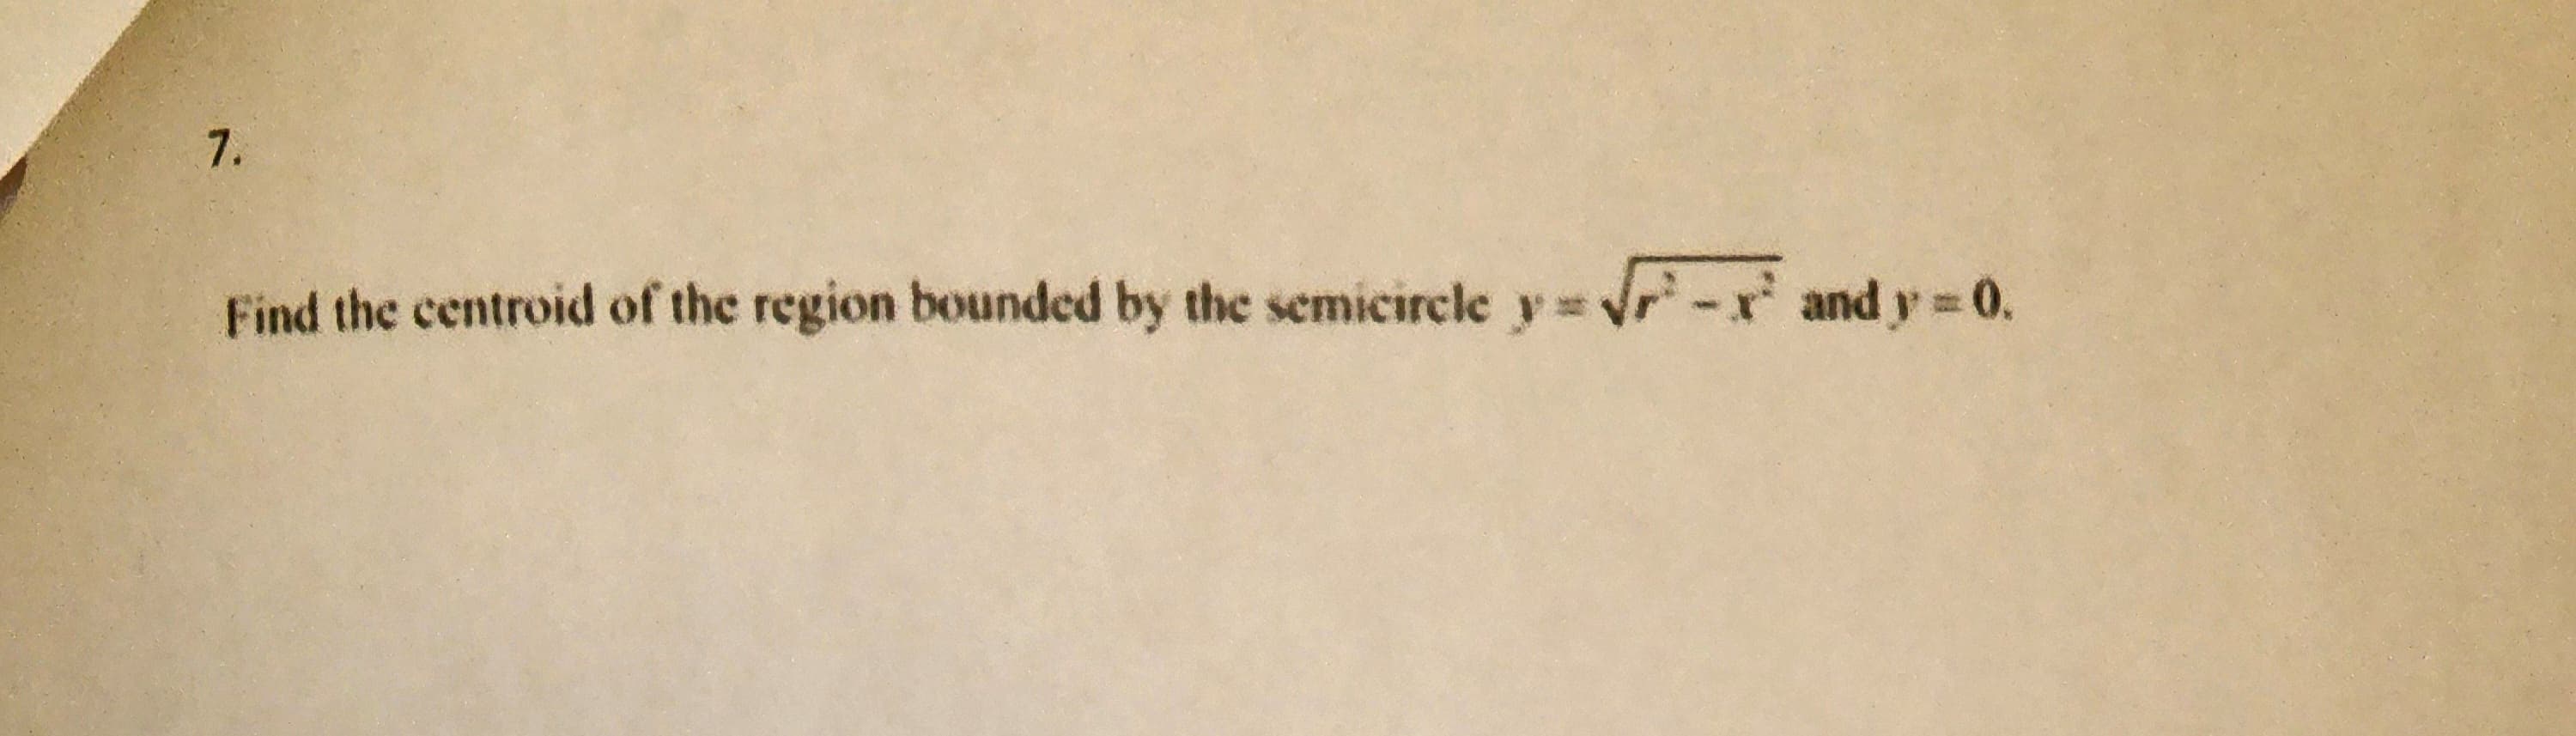 7.
Find the centroid of the region bounded by the semicircle y = √²-² and y = 0.